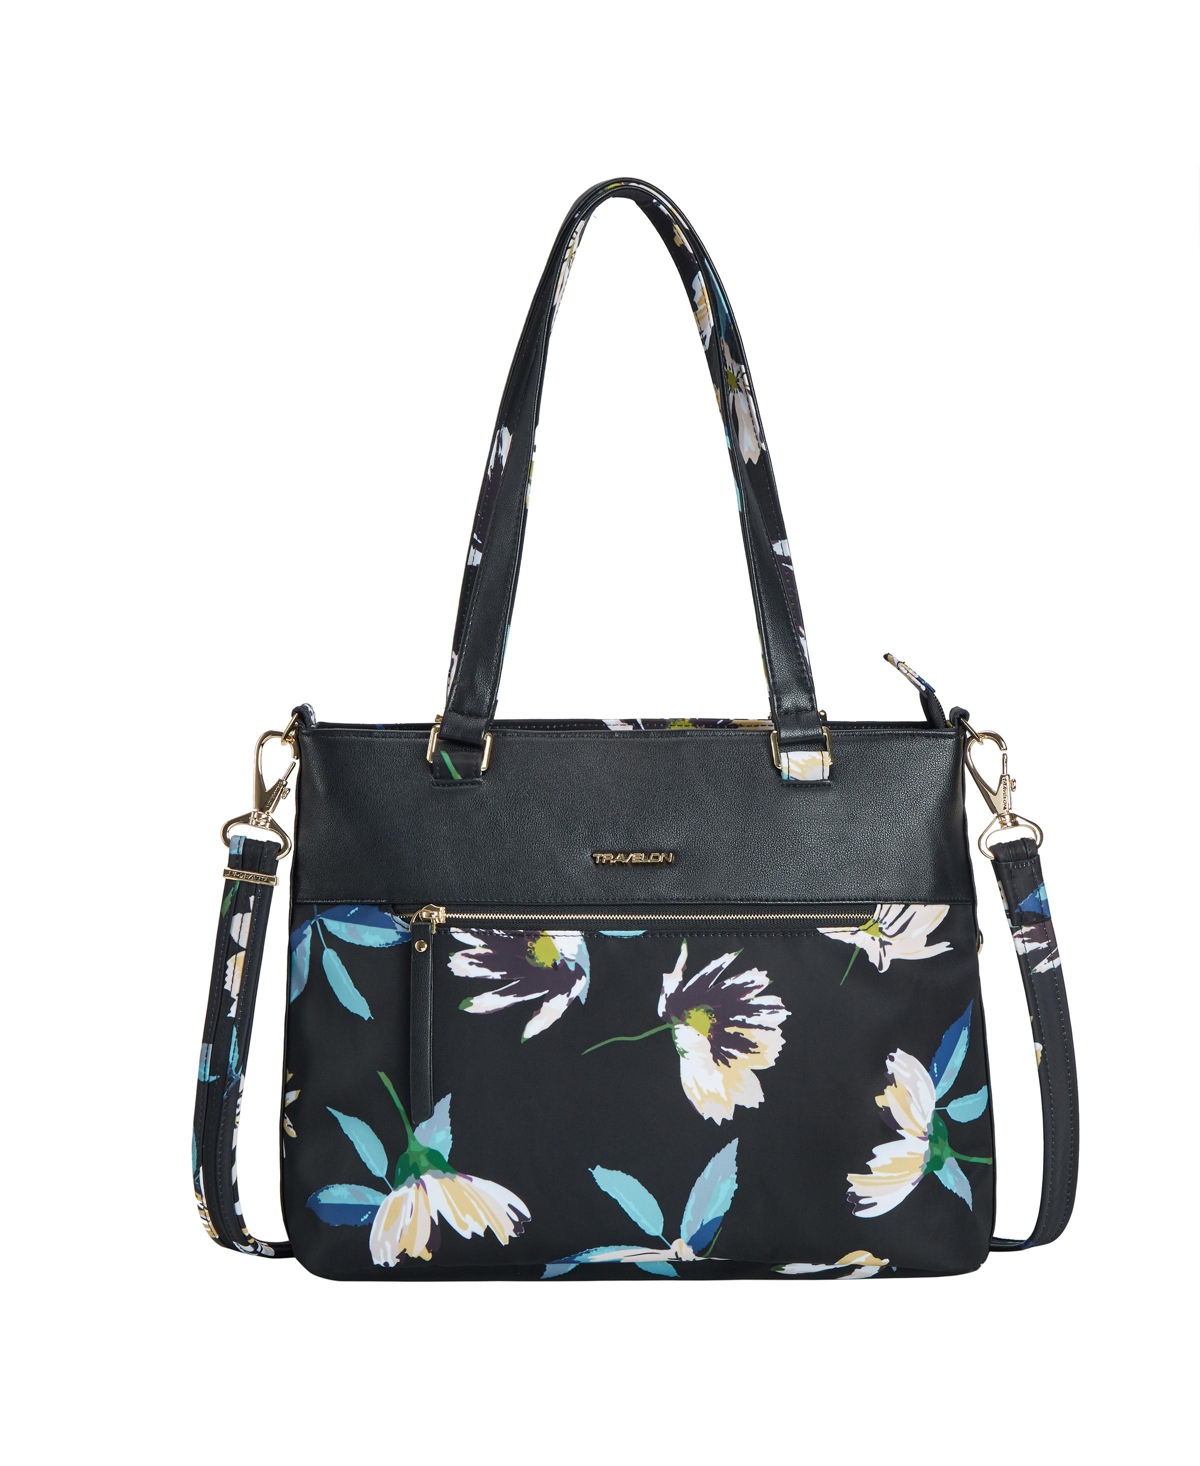 Anti-Theft Addison Tote - Midnight Floral